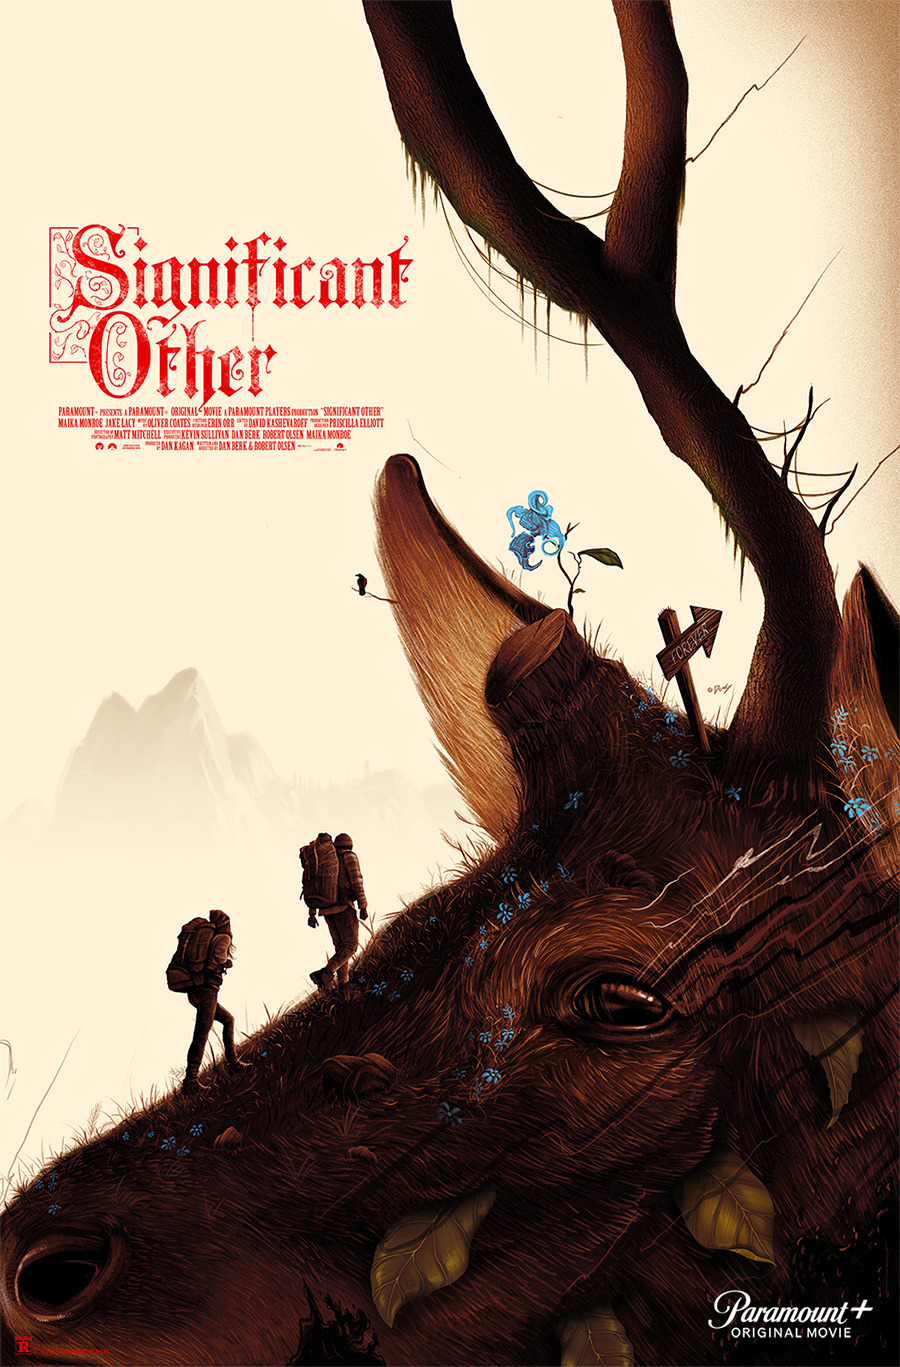 Extra Large Movie Poster Image for Significant Other (#5 of 5)